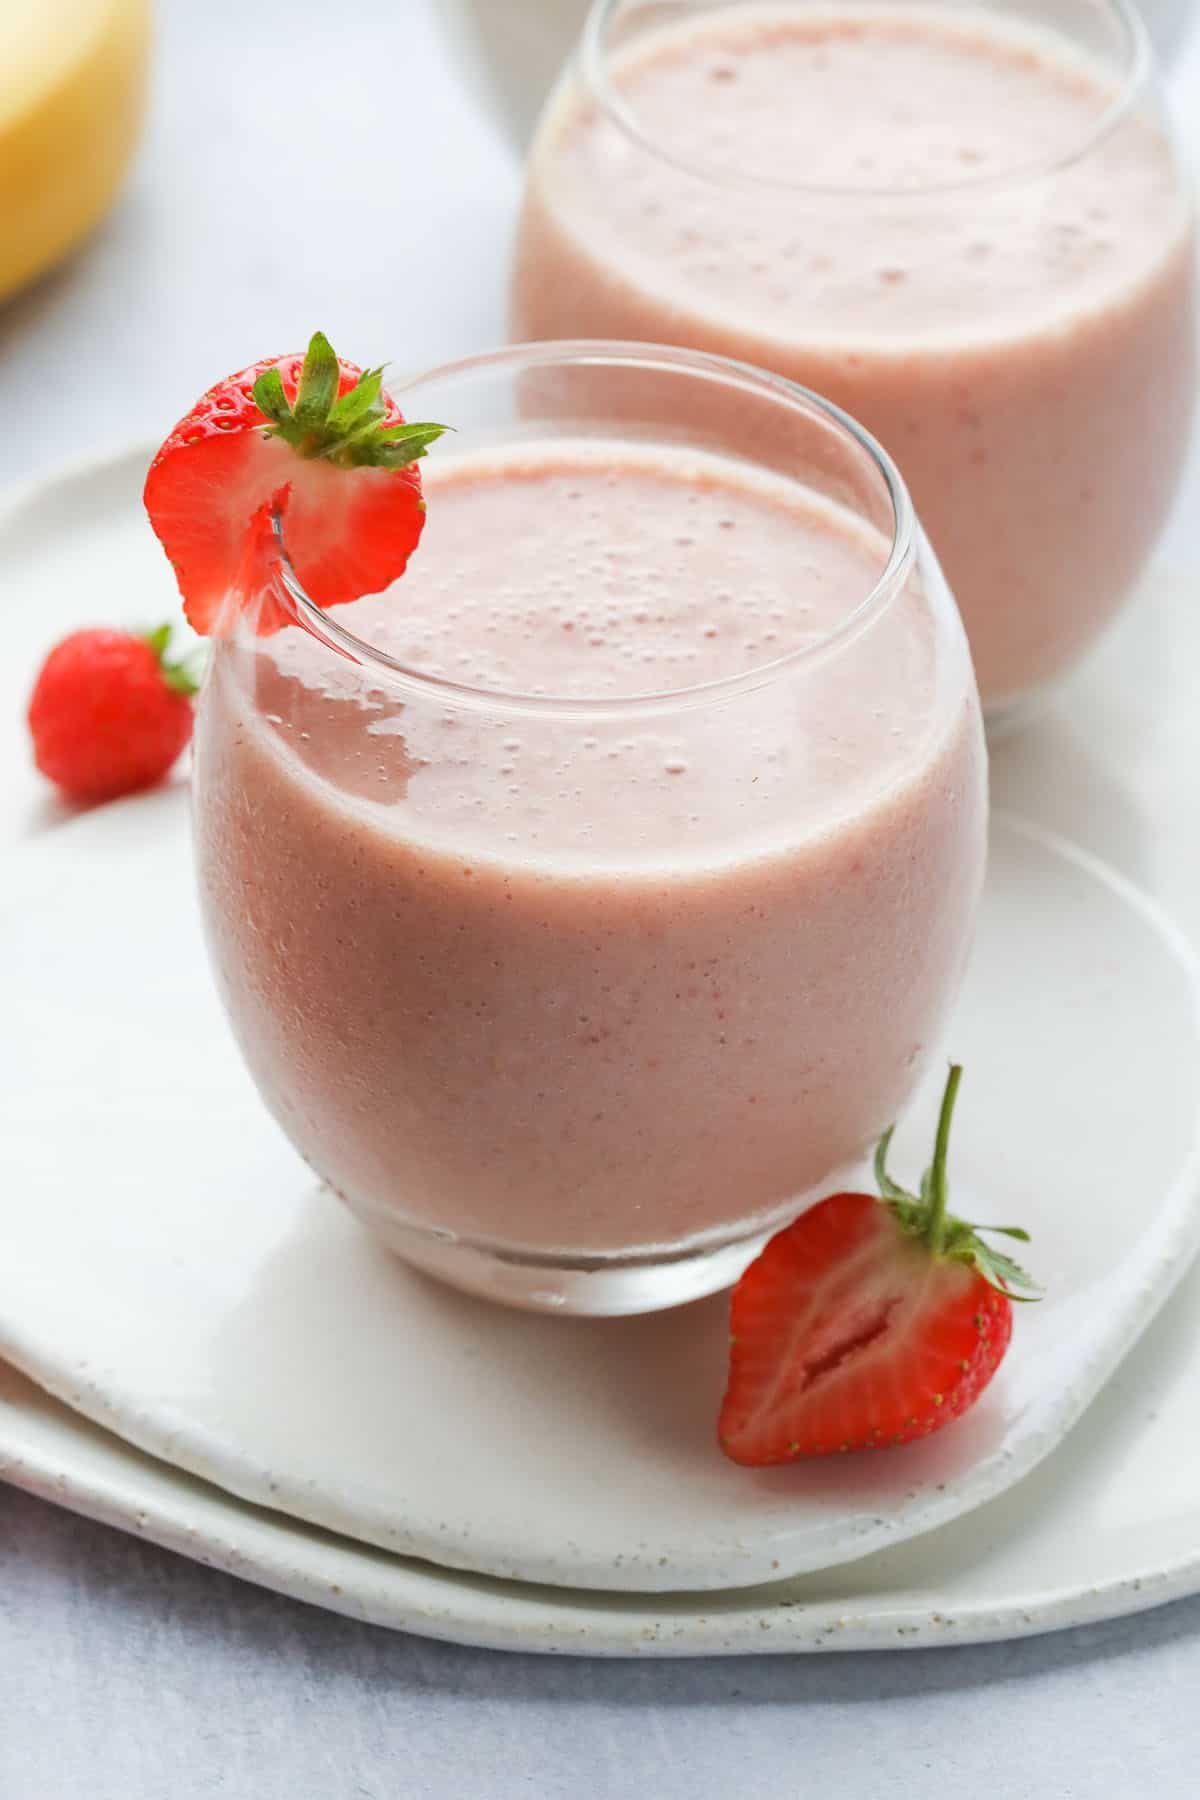 Banana strawberry smoothie served in 2 glasses, with fresh strawberries as a garnish